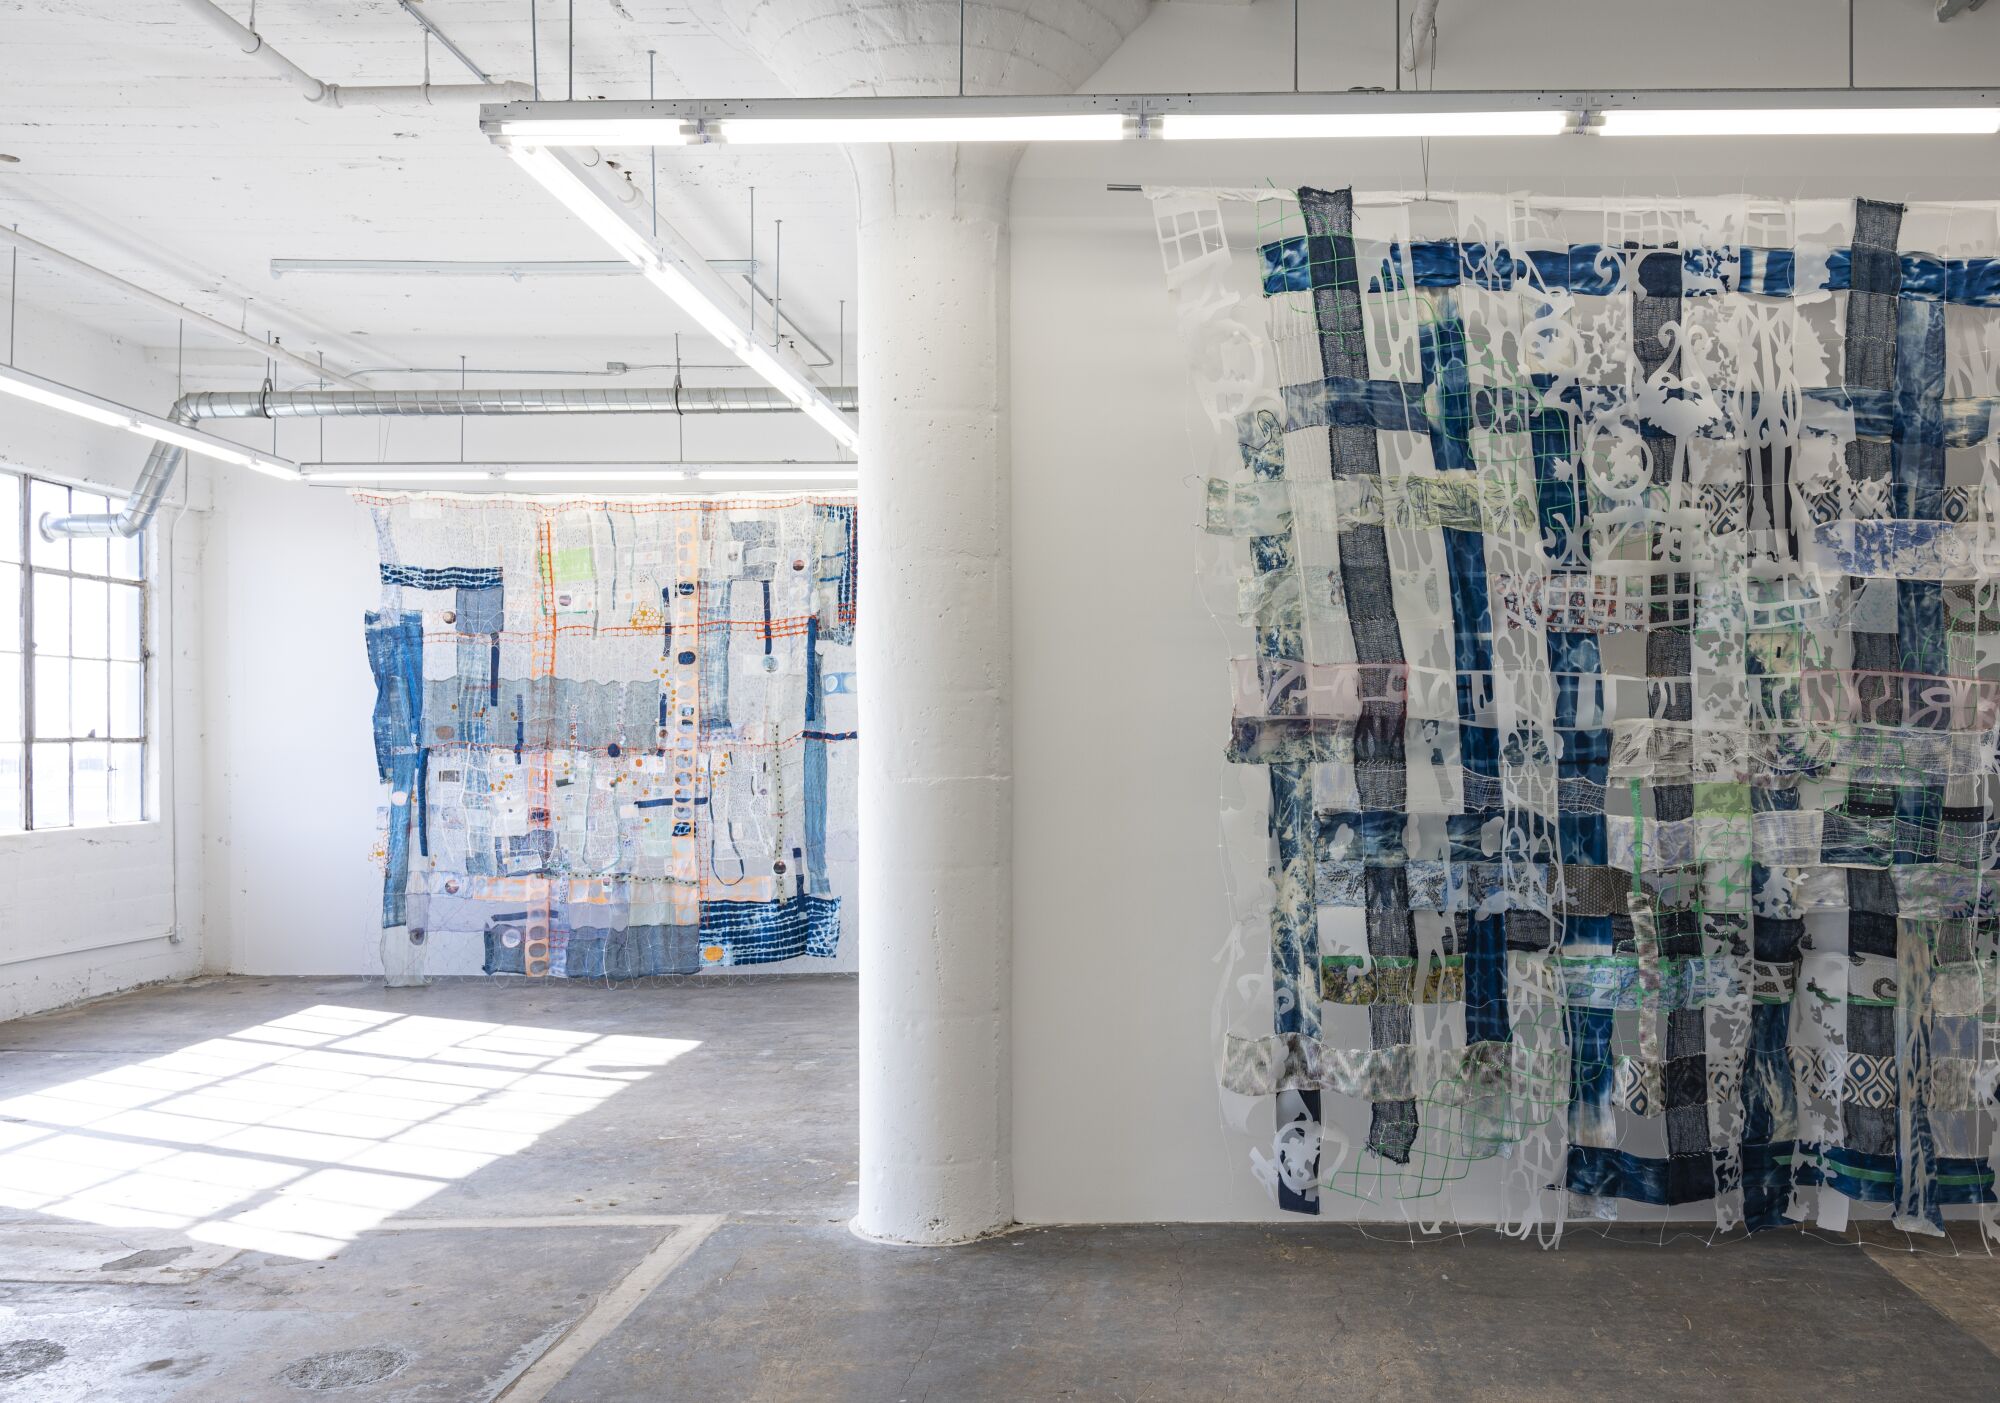 Woven works by Fran Siegel in the two-person show "Seam & Transfer" at Wilding Cran